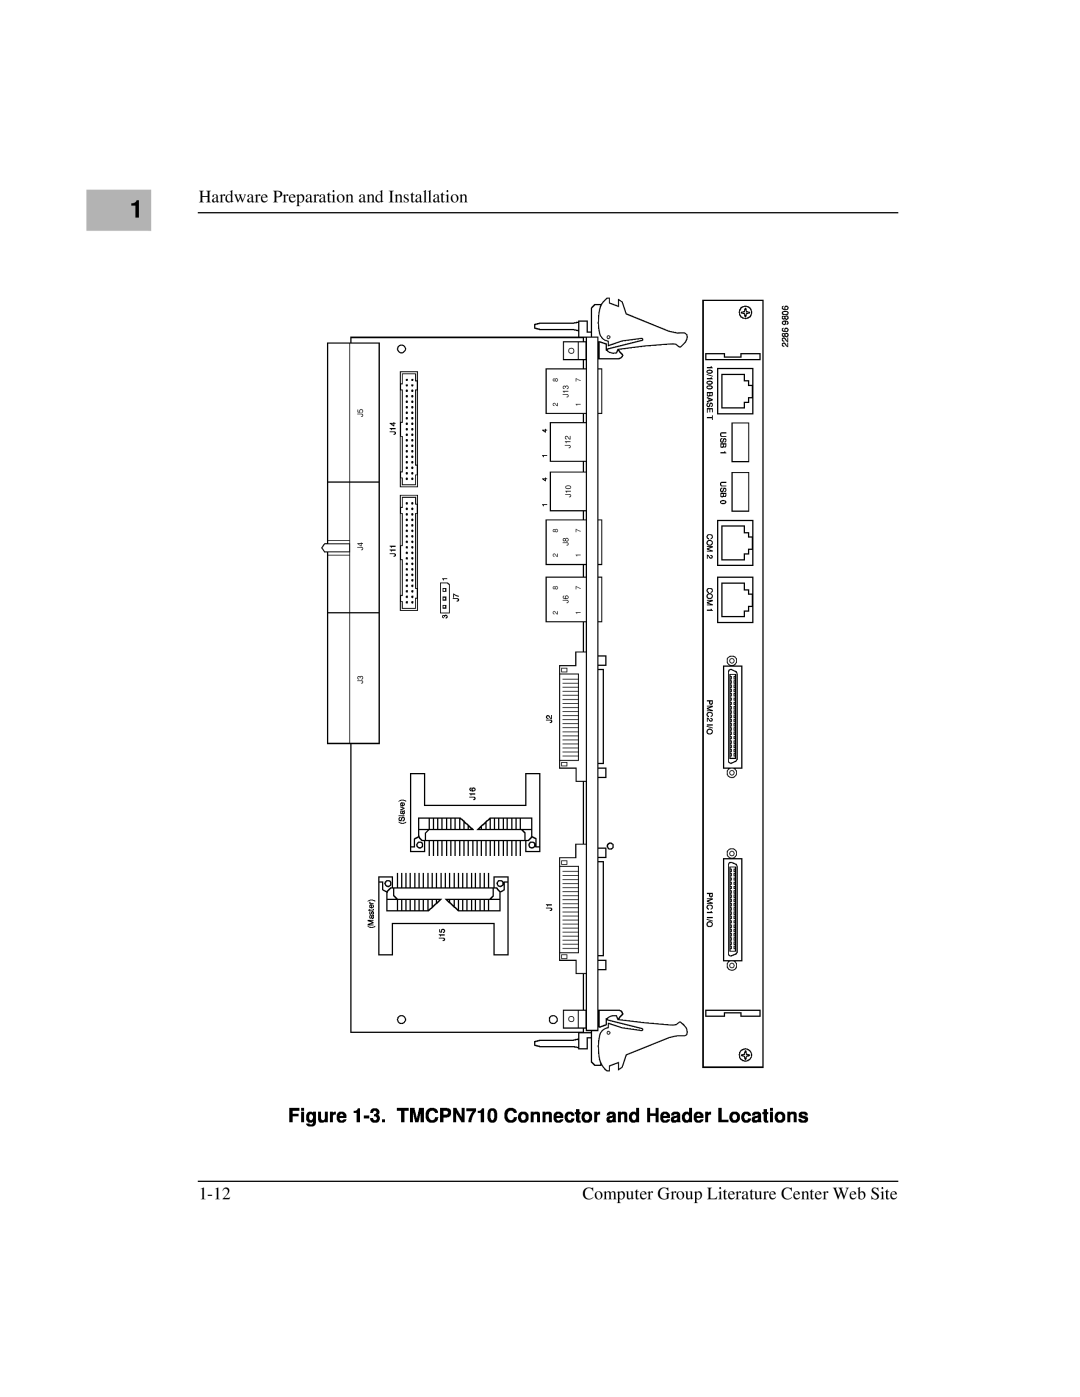 Motorola MCPN750A, IH5 manual 3. TMCPN710 Connector and Header Locations, Hardware Preparation and Installation, 1-12, 2286 